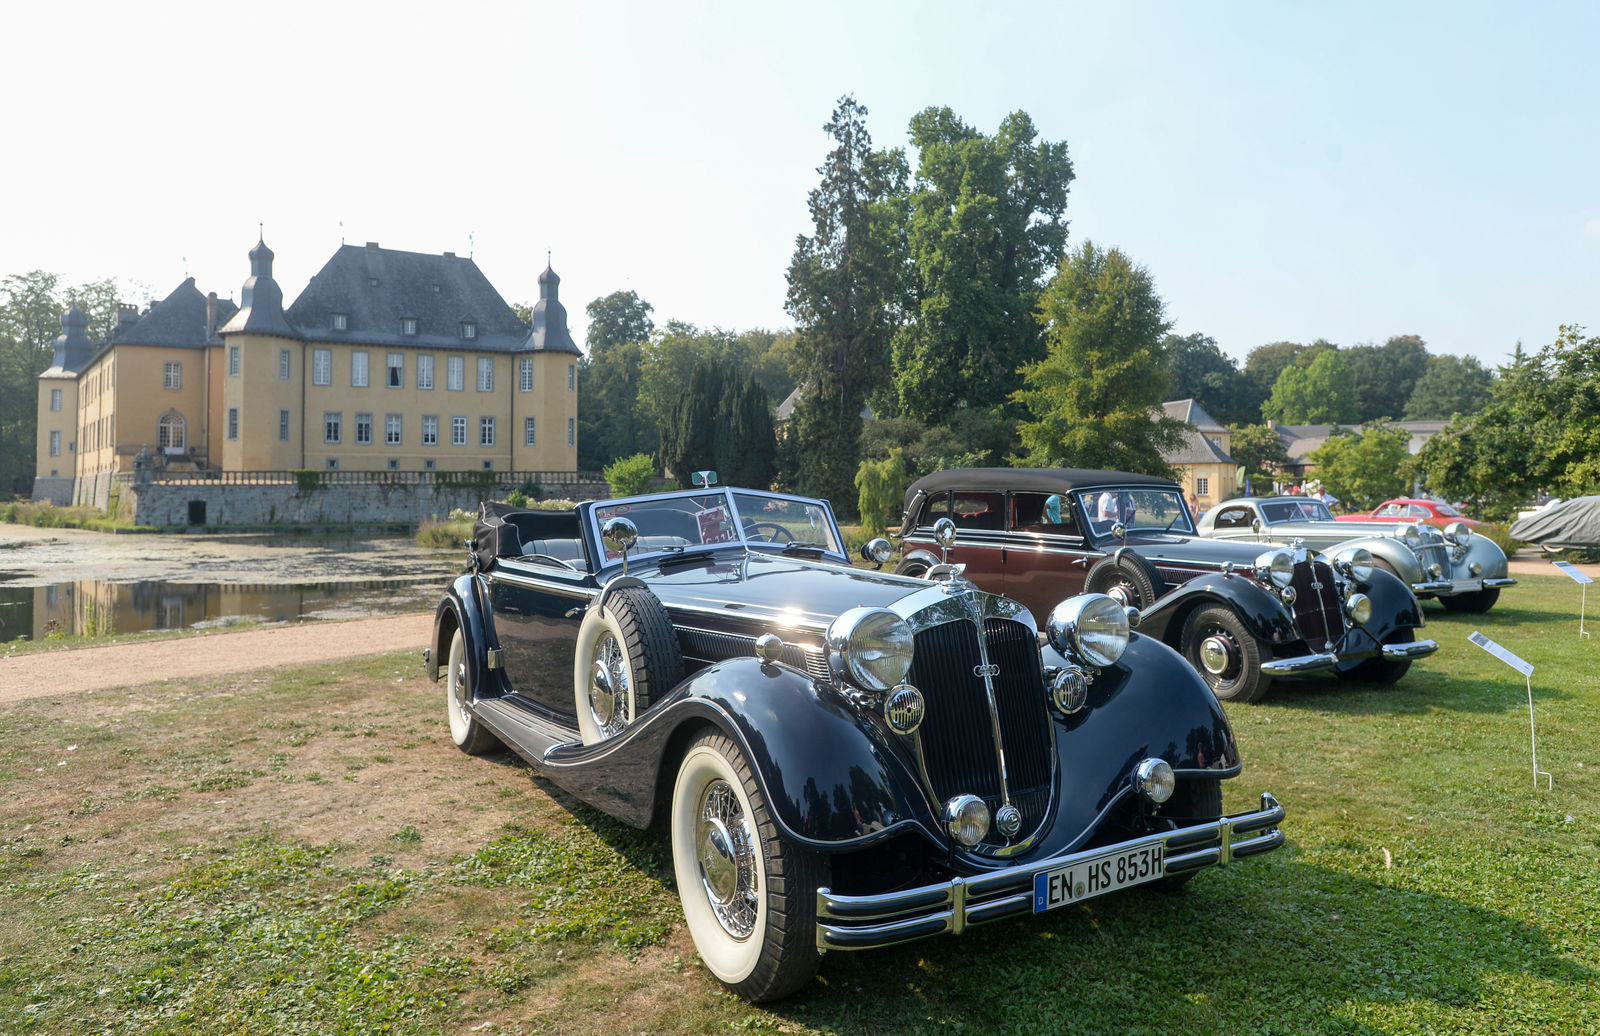 Story: Four-wheel fun at the castle